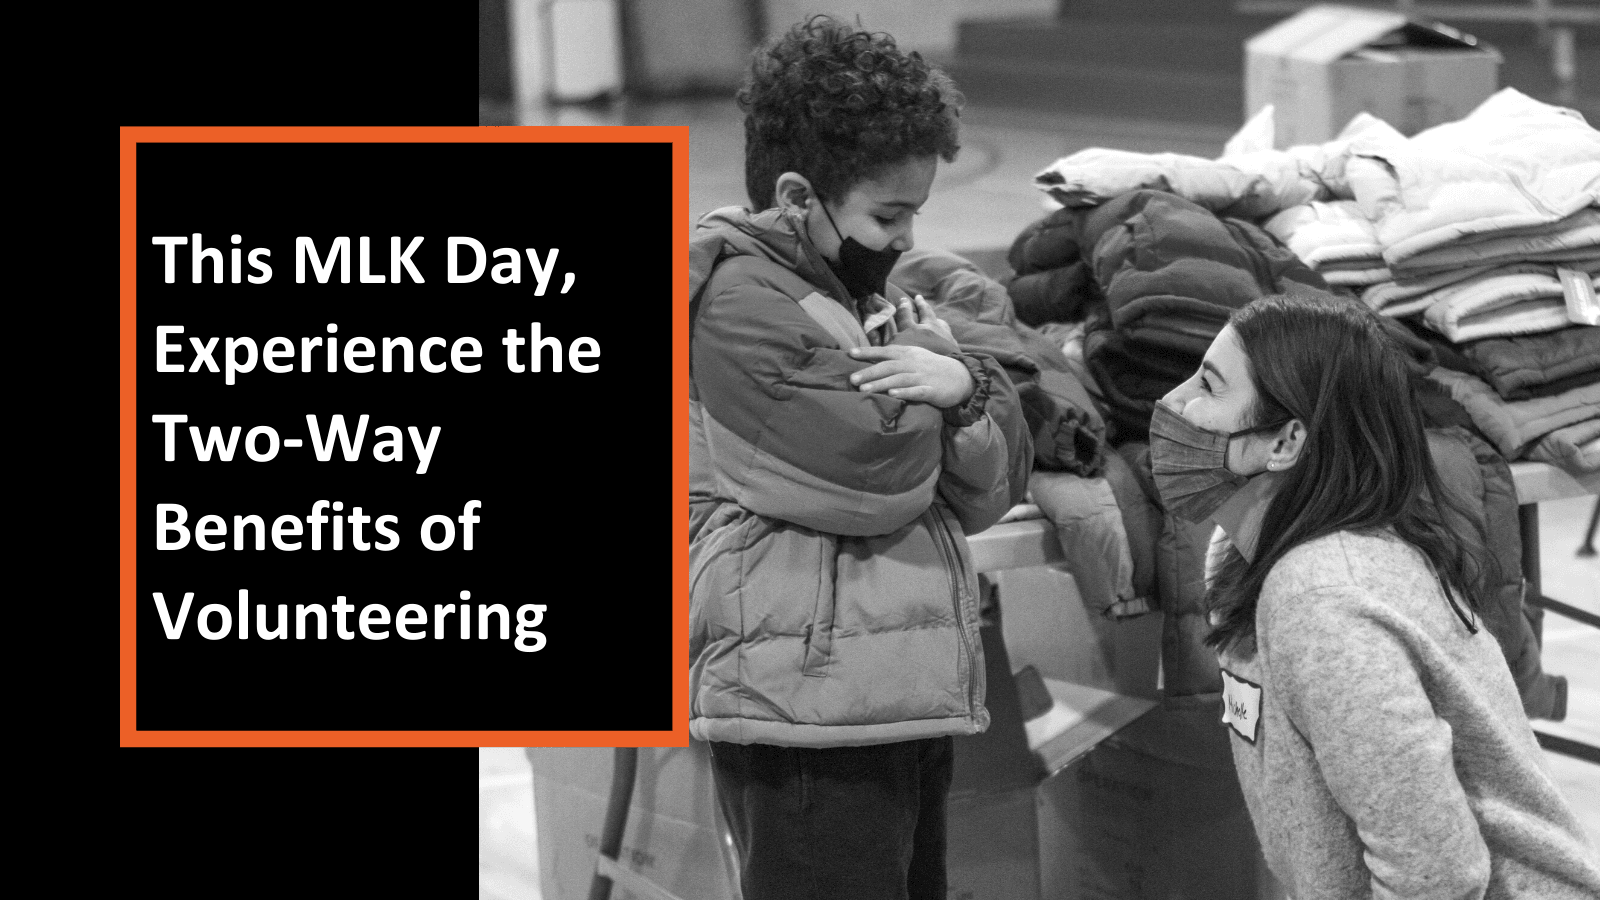 This MLK Day, Experience the Two-Way Benefits of Volunteering